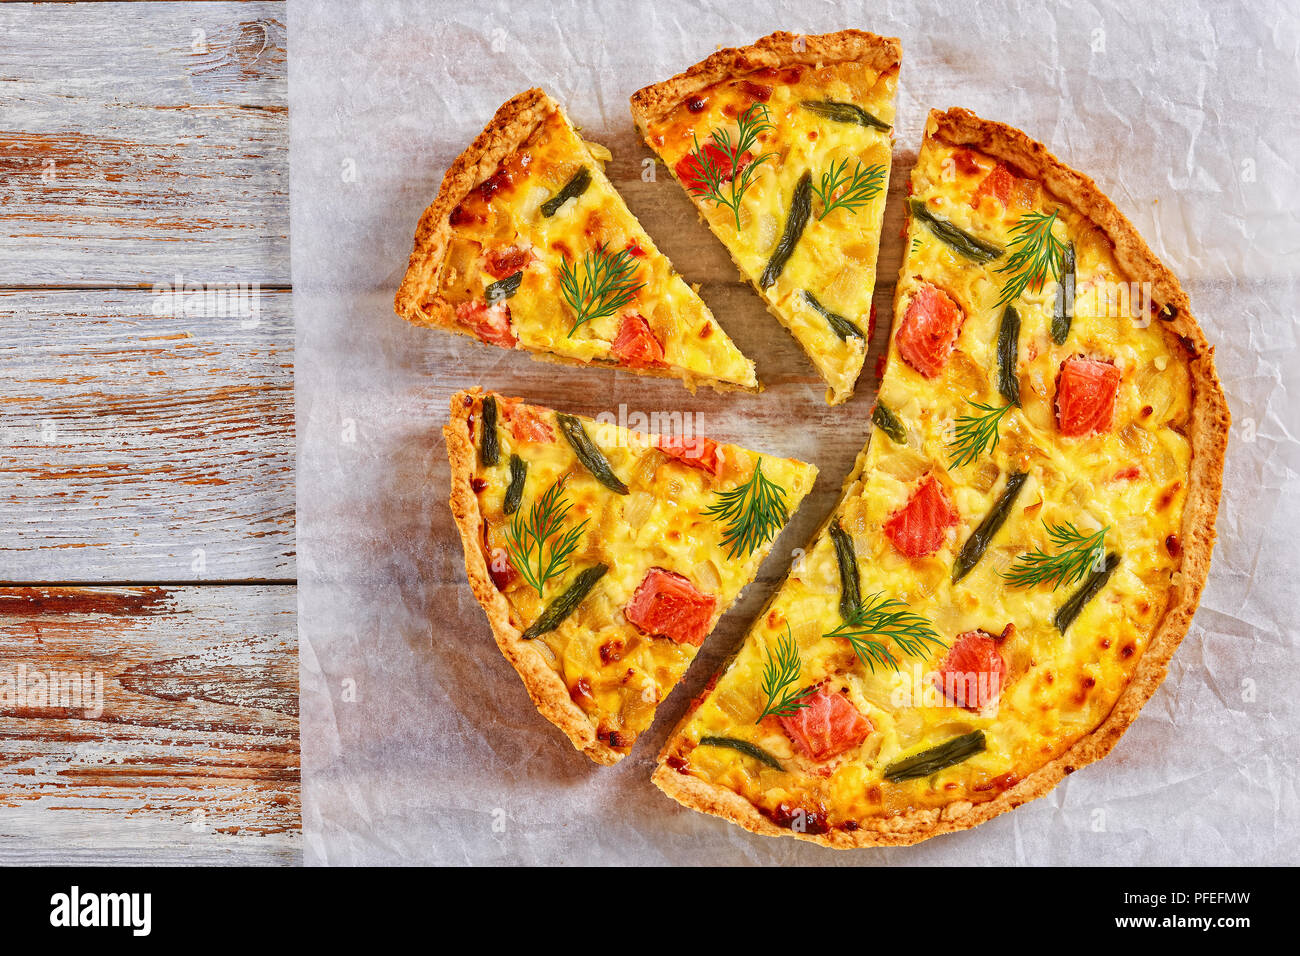 delicious homemade french quiche with red fish, green bean, sauce bechamel and Emmental cheese cut in slices on baking paper on white wooden backgroun Stock Photo